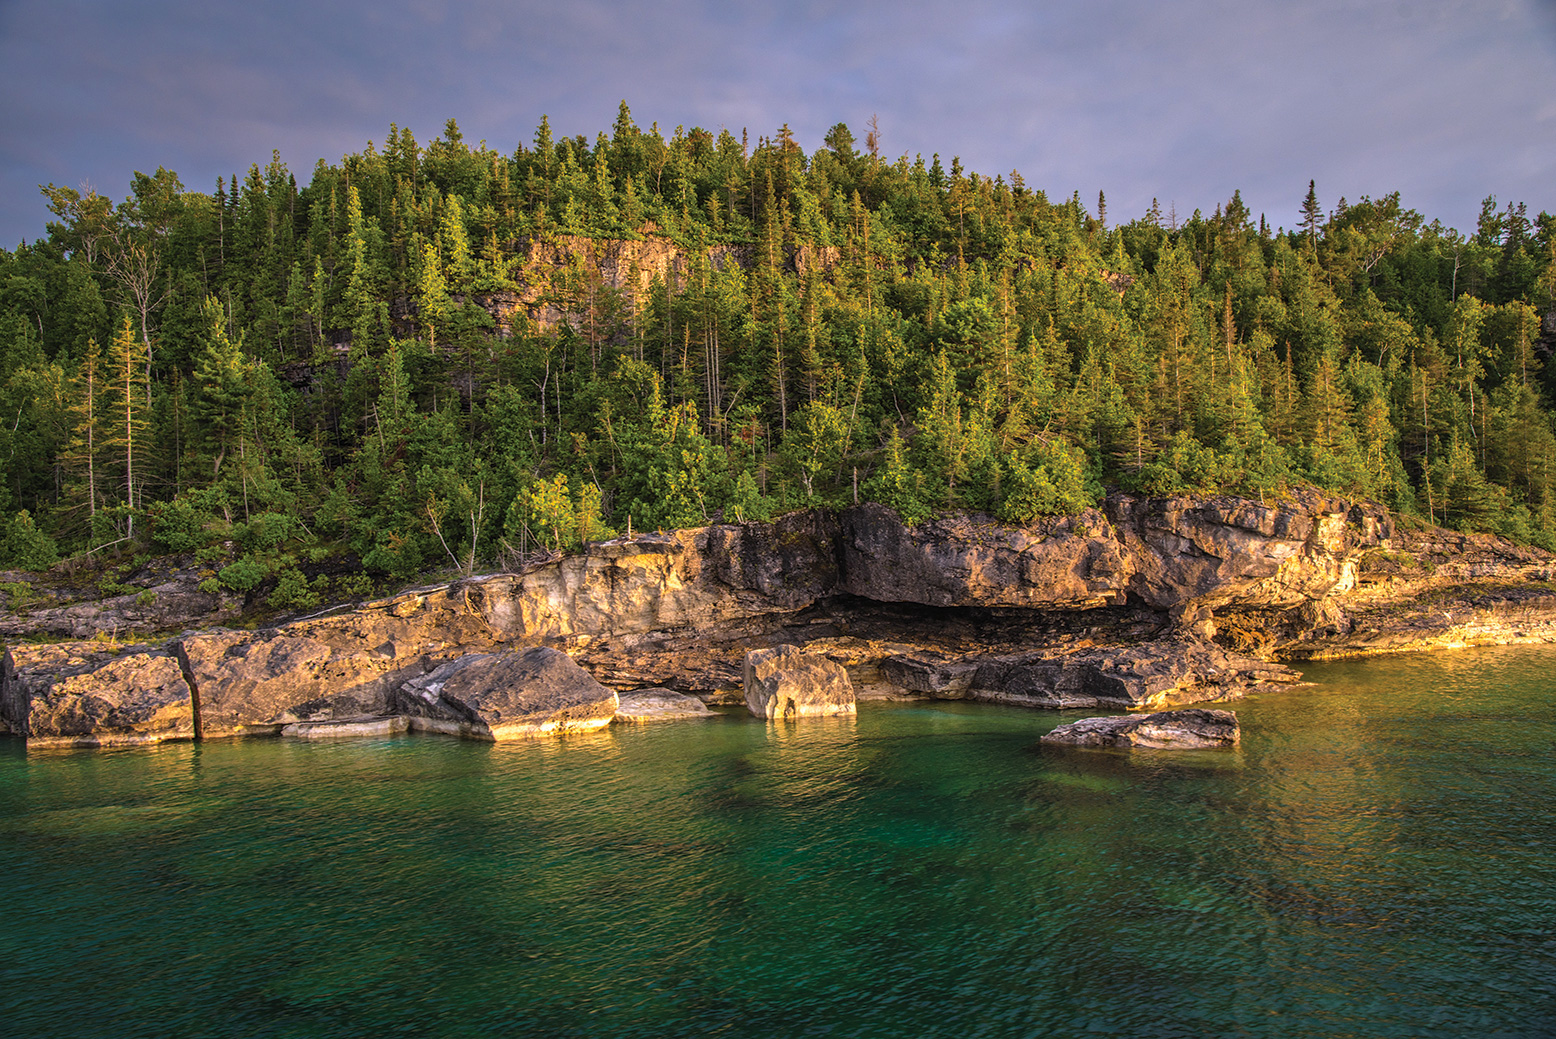 Tobermory, at the tip of the Bruce Peninsula, is a picturesque town featuring beautiful views of water, harbours and cliffs.